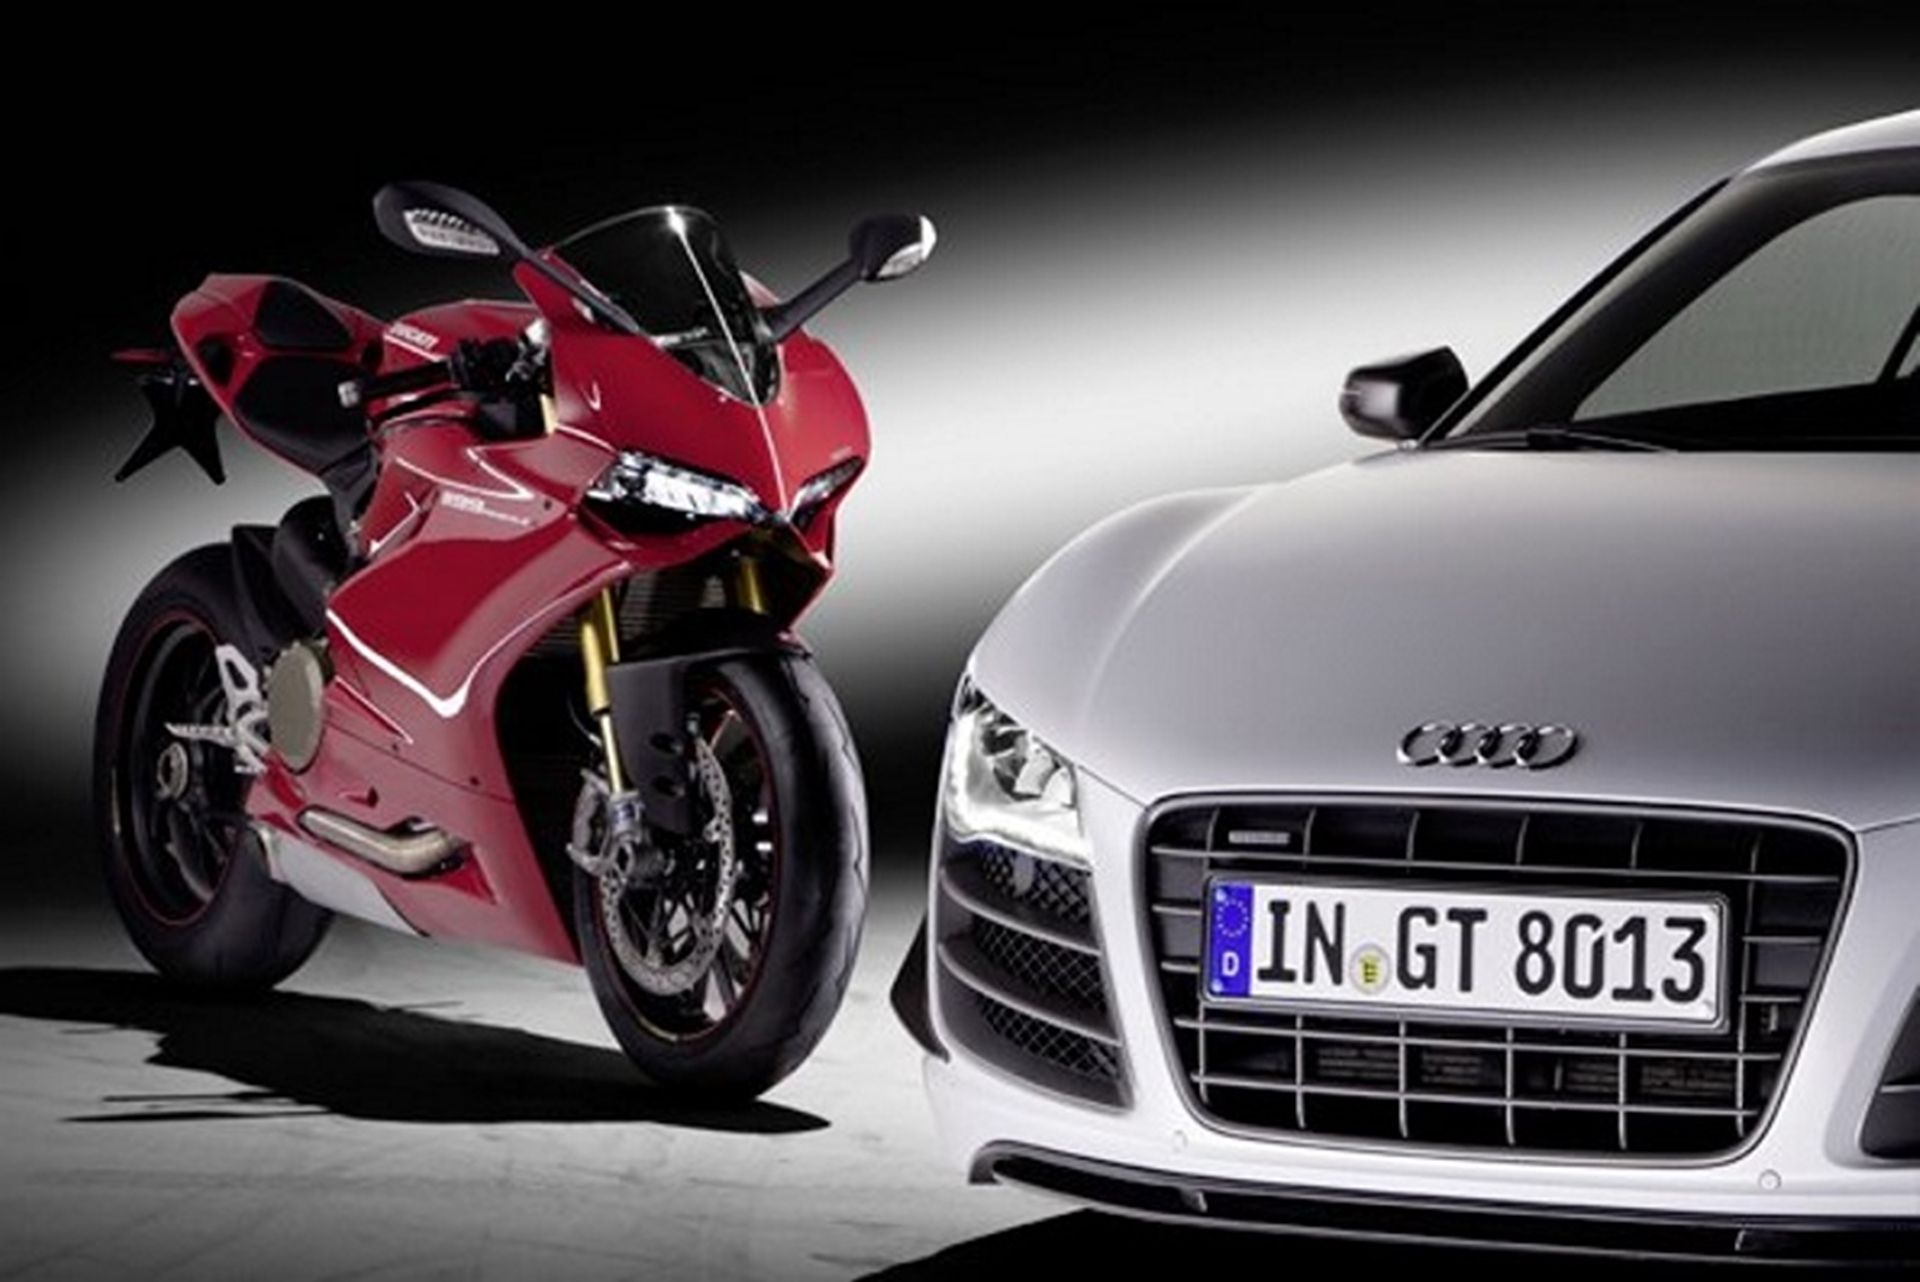 red Ducati motorcycle behind the front end of a silver Audi R8